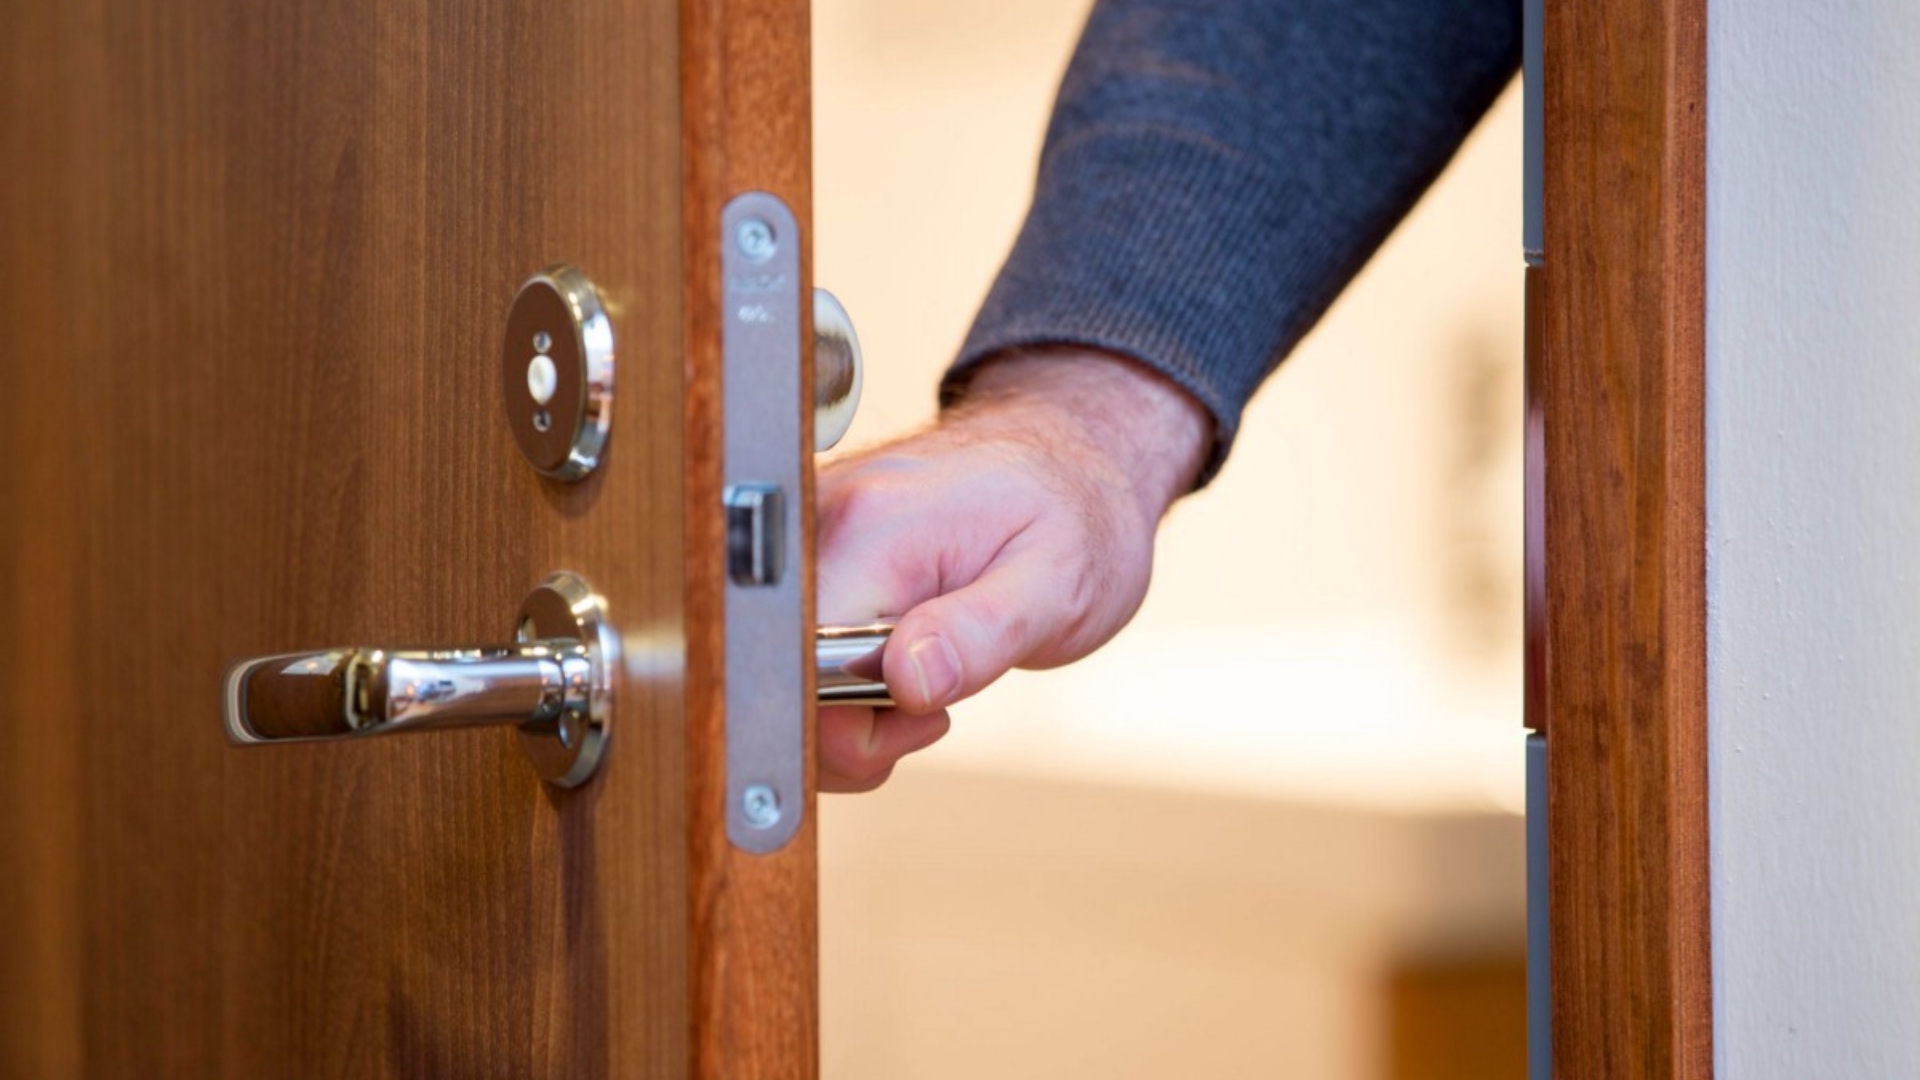 A man opening a door with a mortise lock